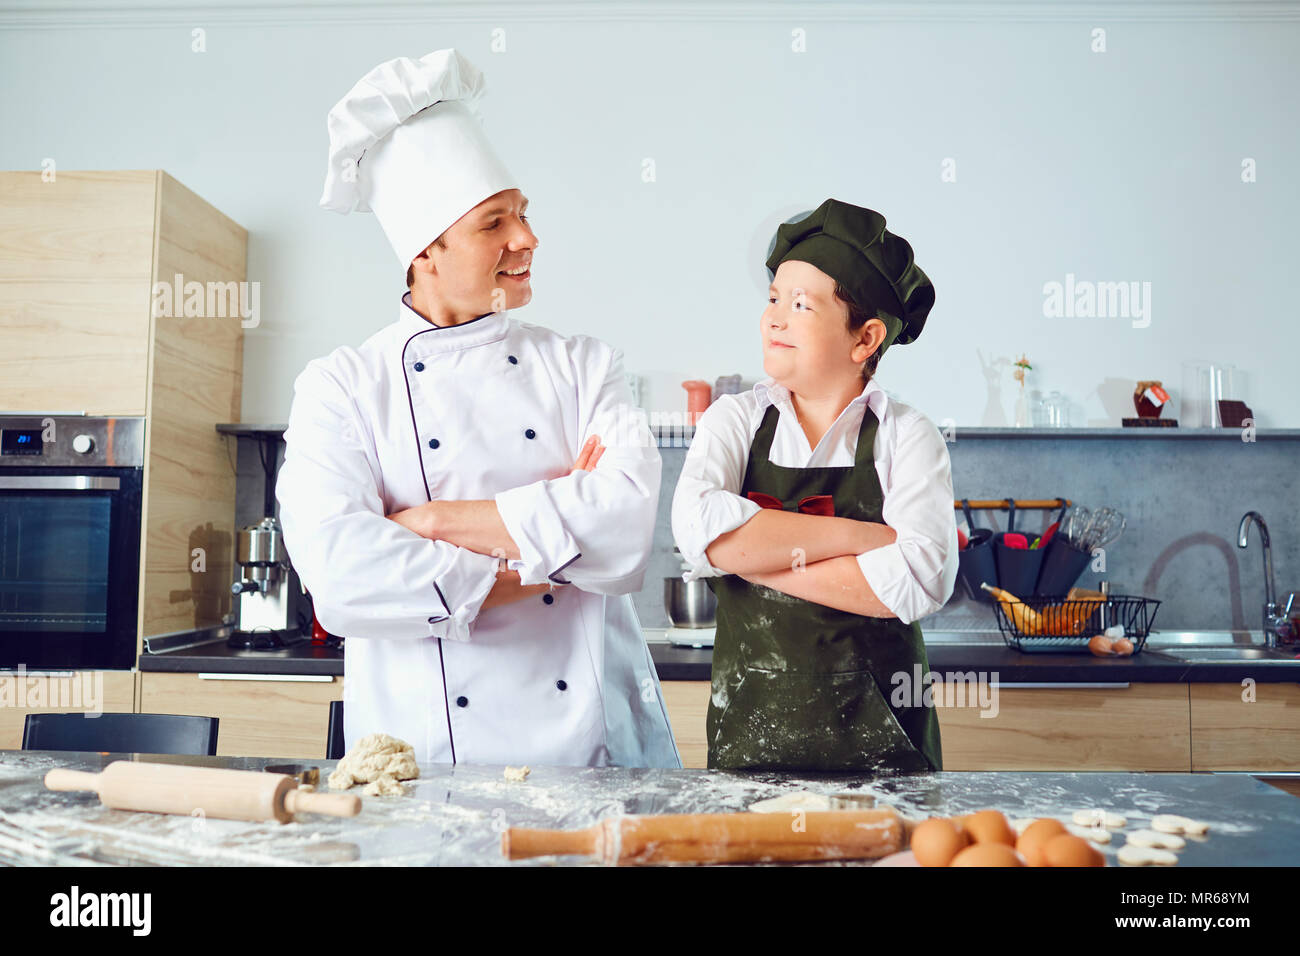 Cook with the boy in the uniform of the cook in the kitchen. Stock Photo